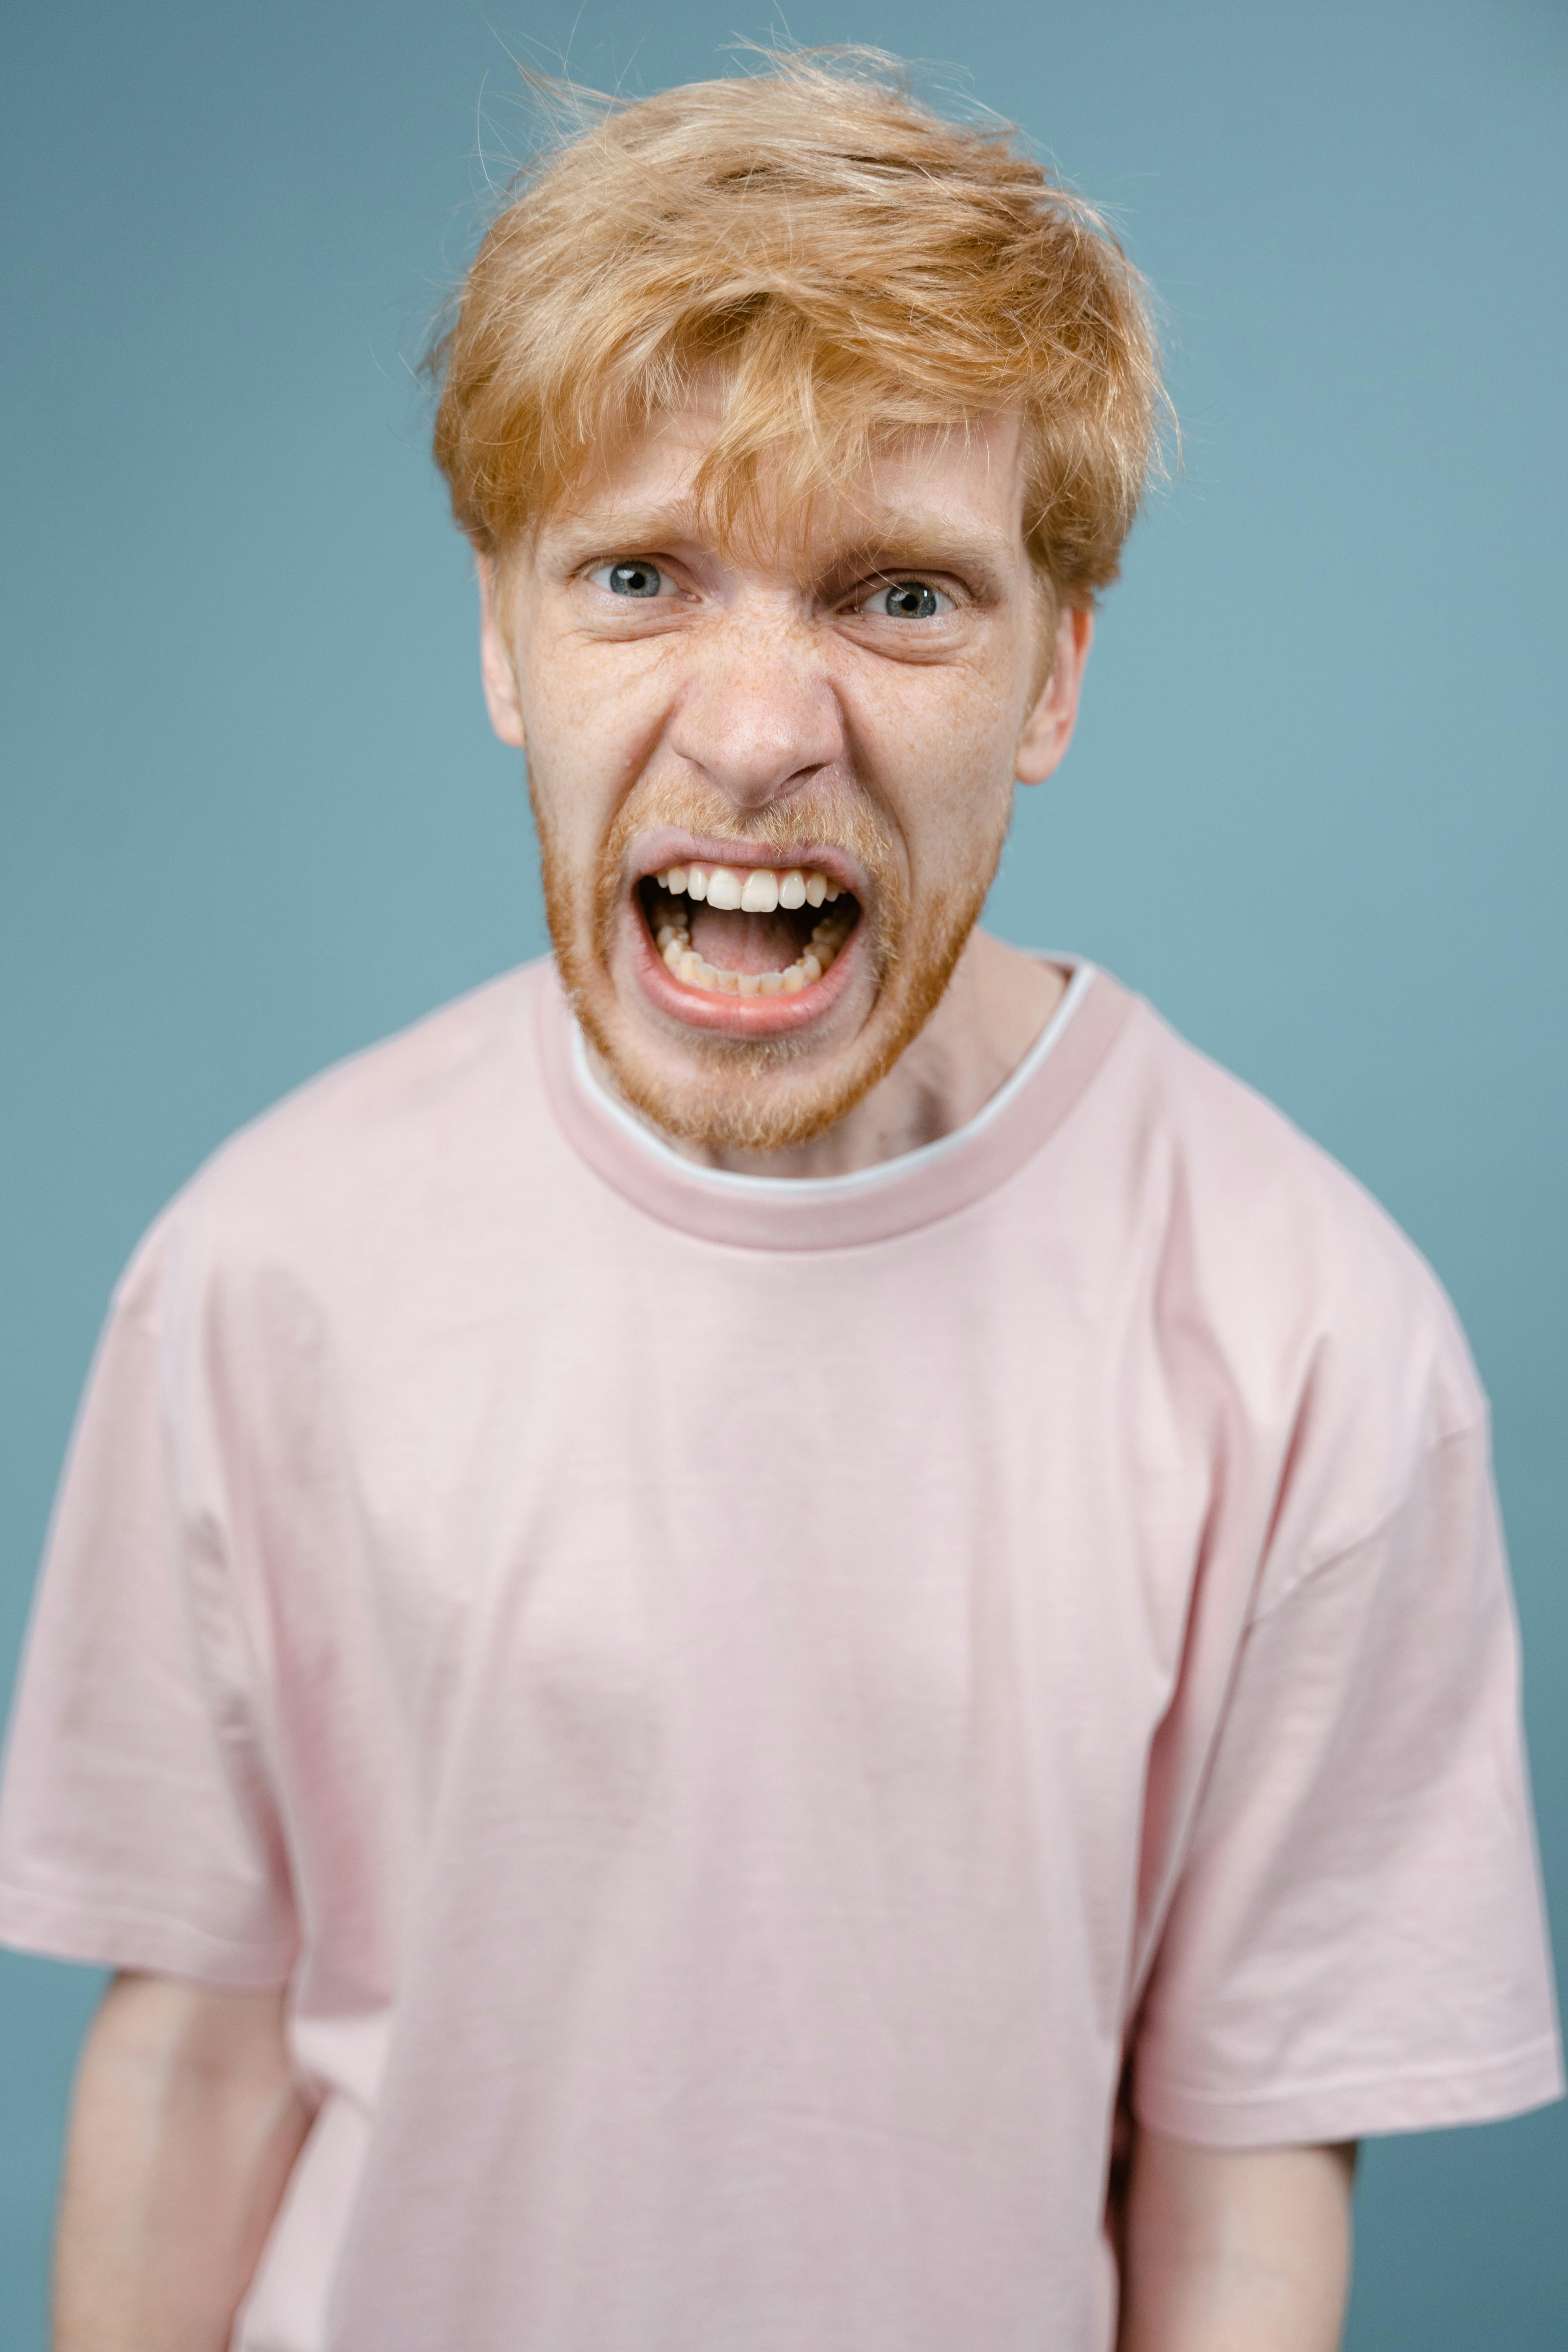 An angry man shouting | Source: Pexels